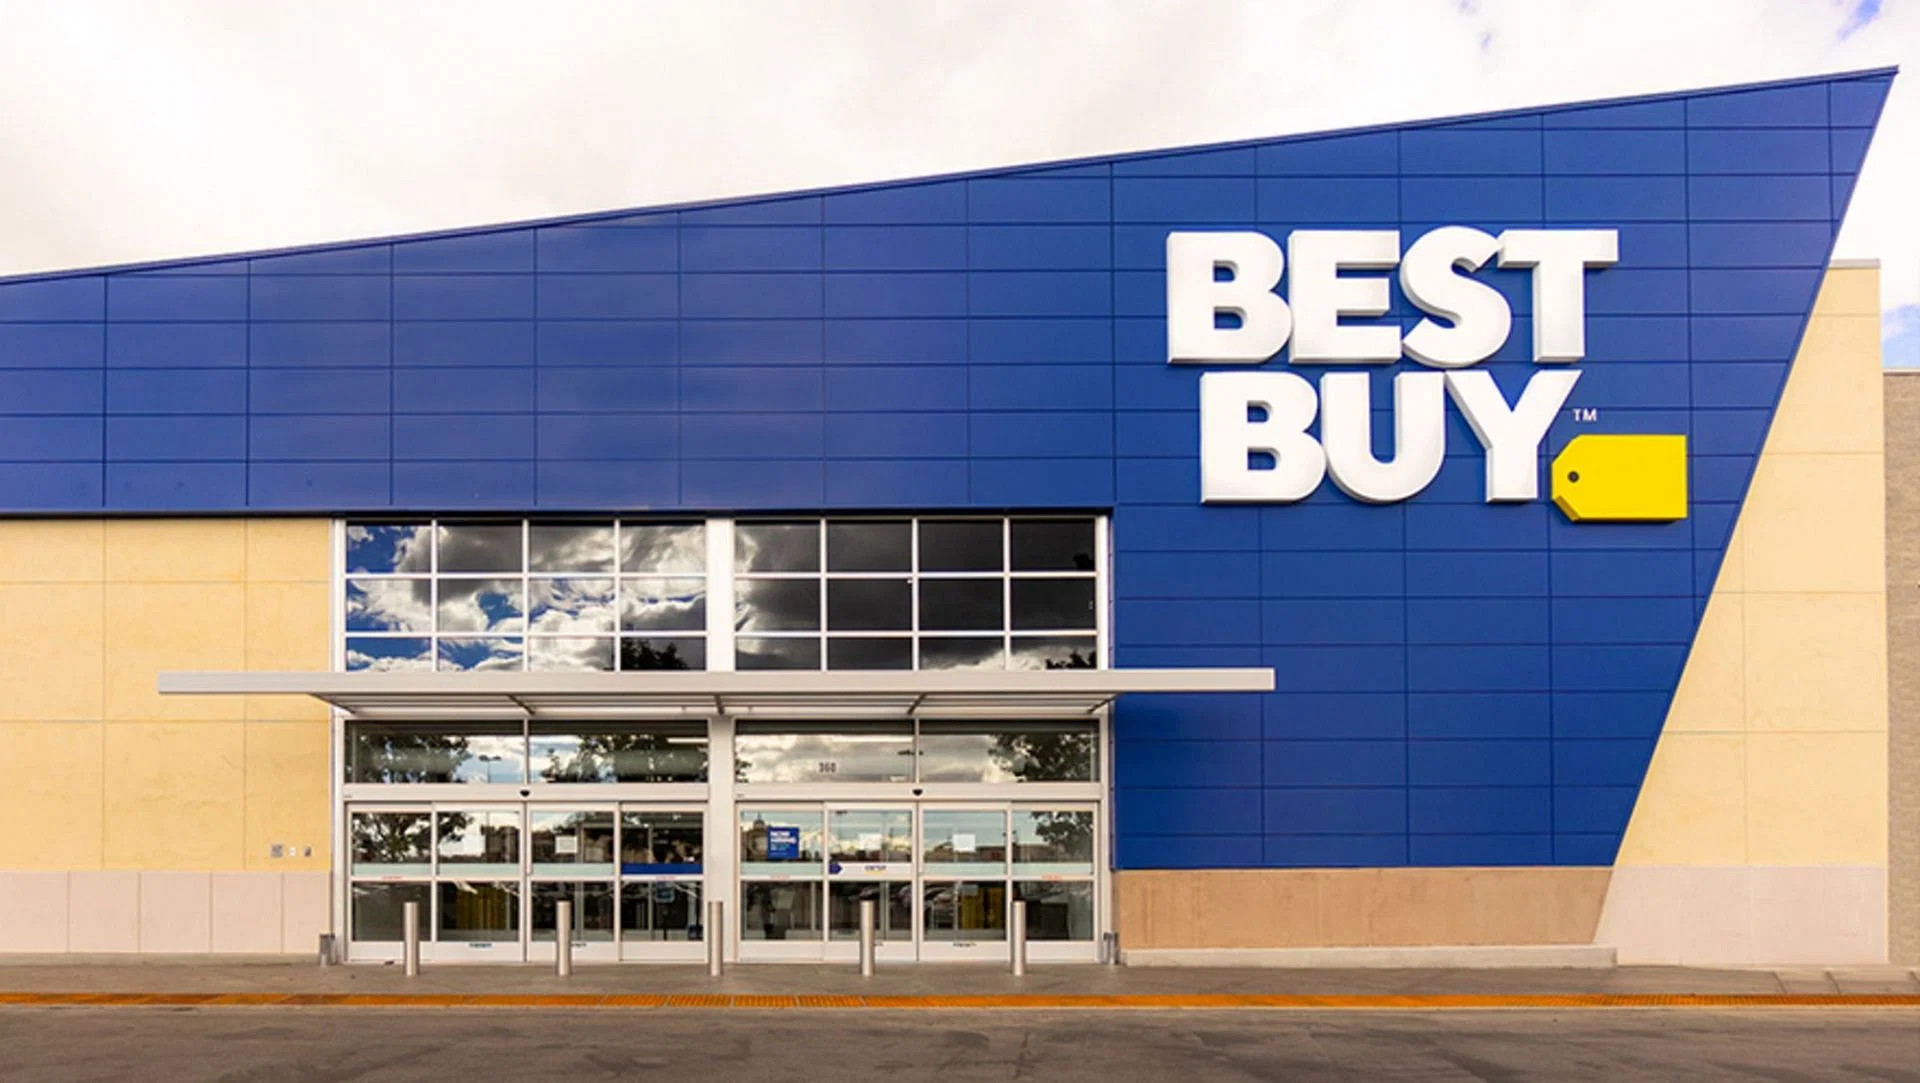 Best Buy Faces Backlash and Support Over LGBTQ Donations: What's at Stake for Shoppers and Investors?